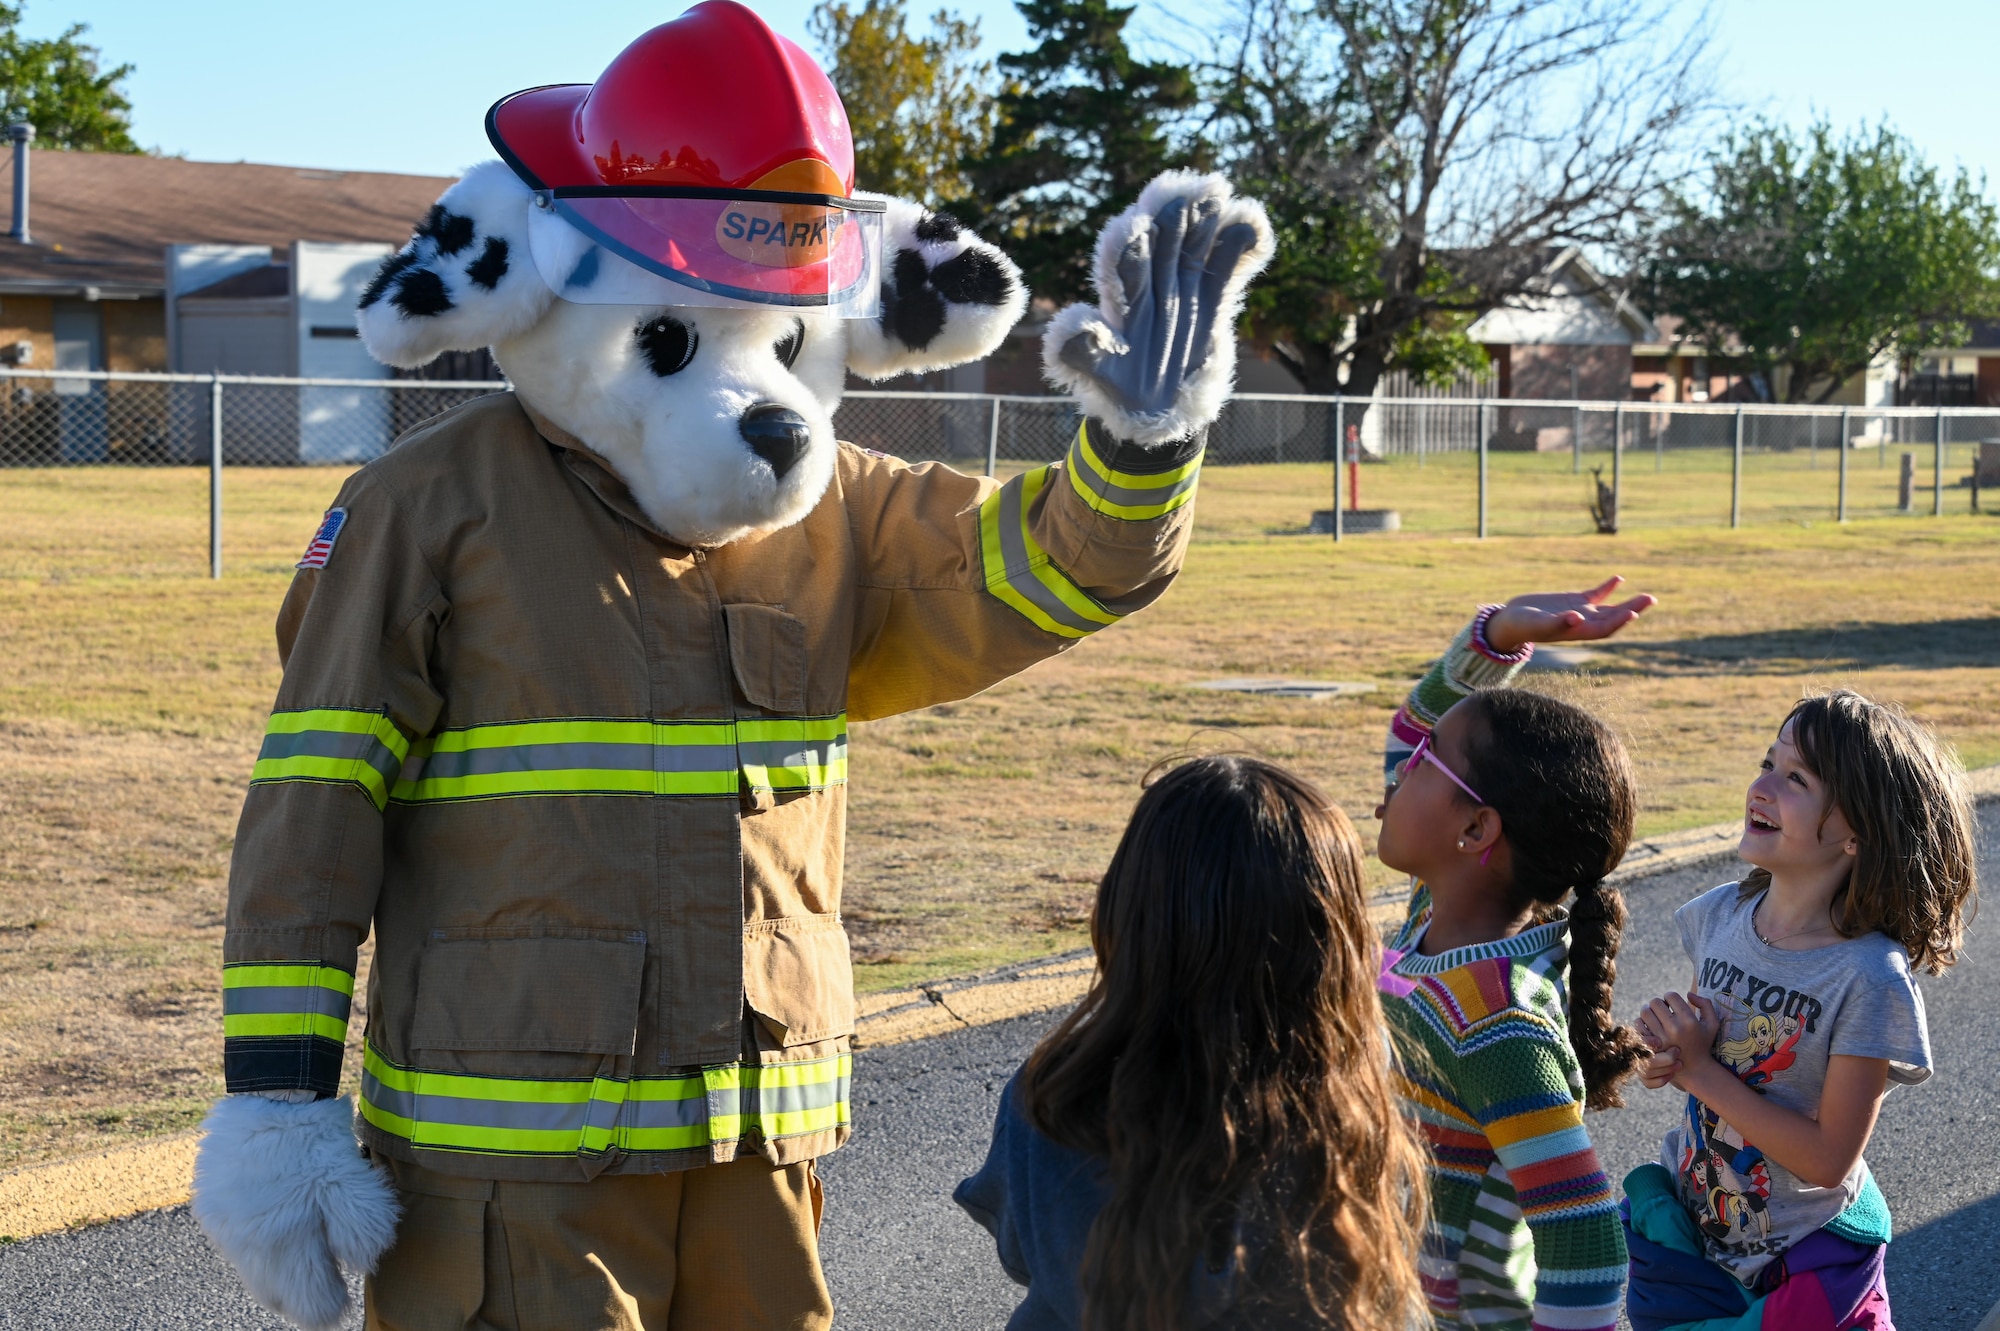 Sparky, 97th Civil Engineer Squadron fire safety mascot, gives a high-five to L. Mendel Rivers Elementary students at Altus Air Force Base, Oklahoma, Oct. 12, 2022. Sparky, the dog, is a mascot created in 1951 to help spread fire safety awareness to children. (U.S. Air Force photo by Senior Airman Kayla Christenson)